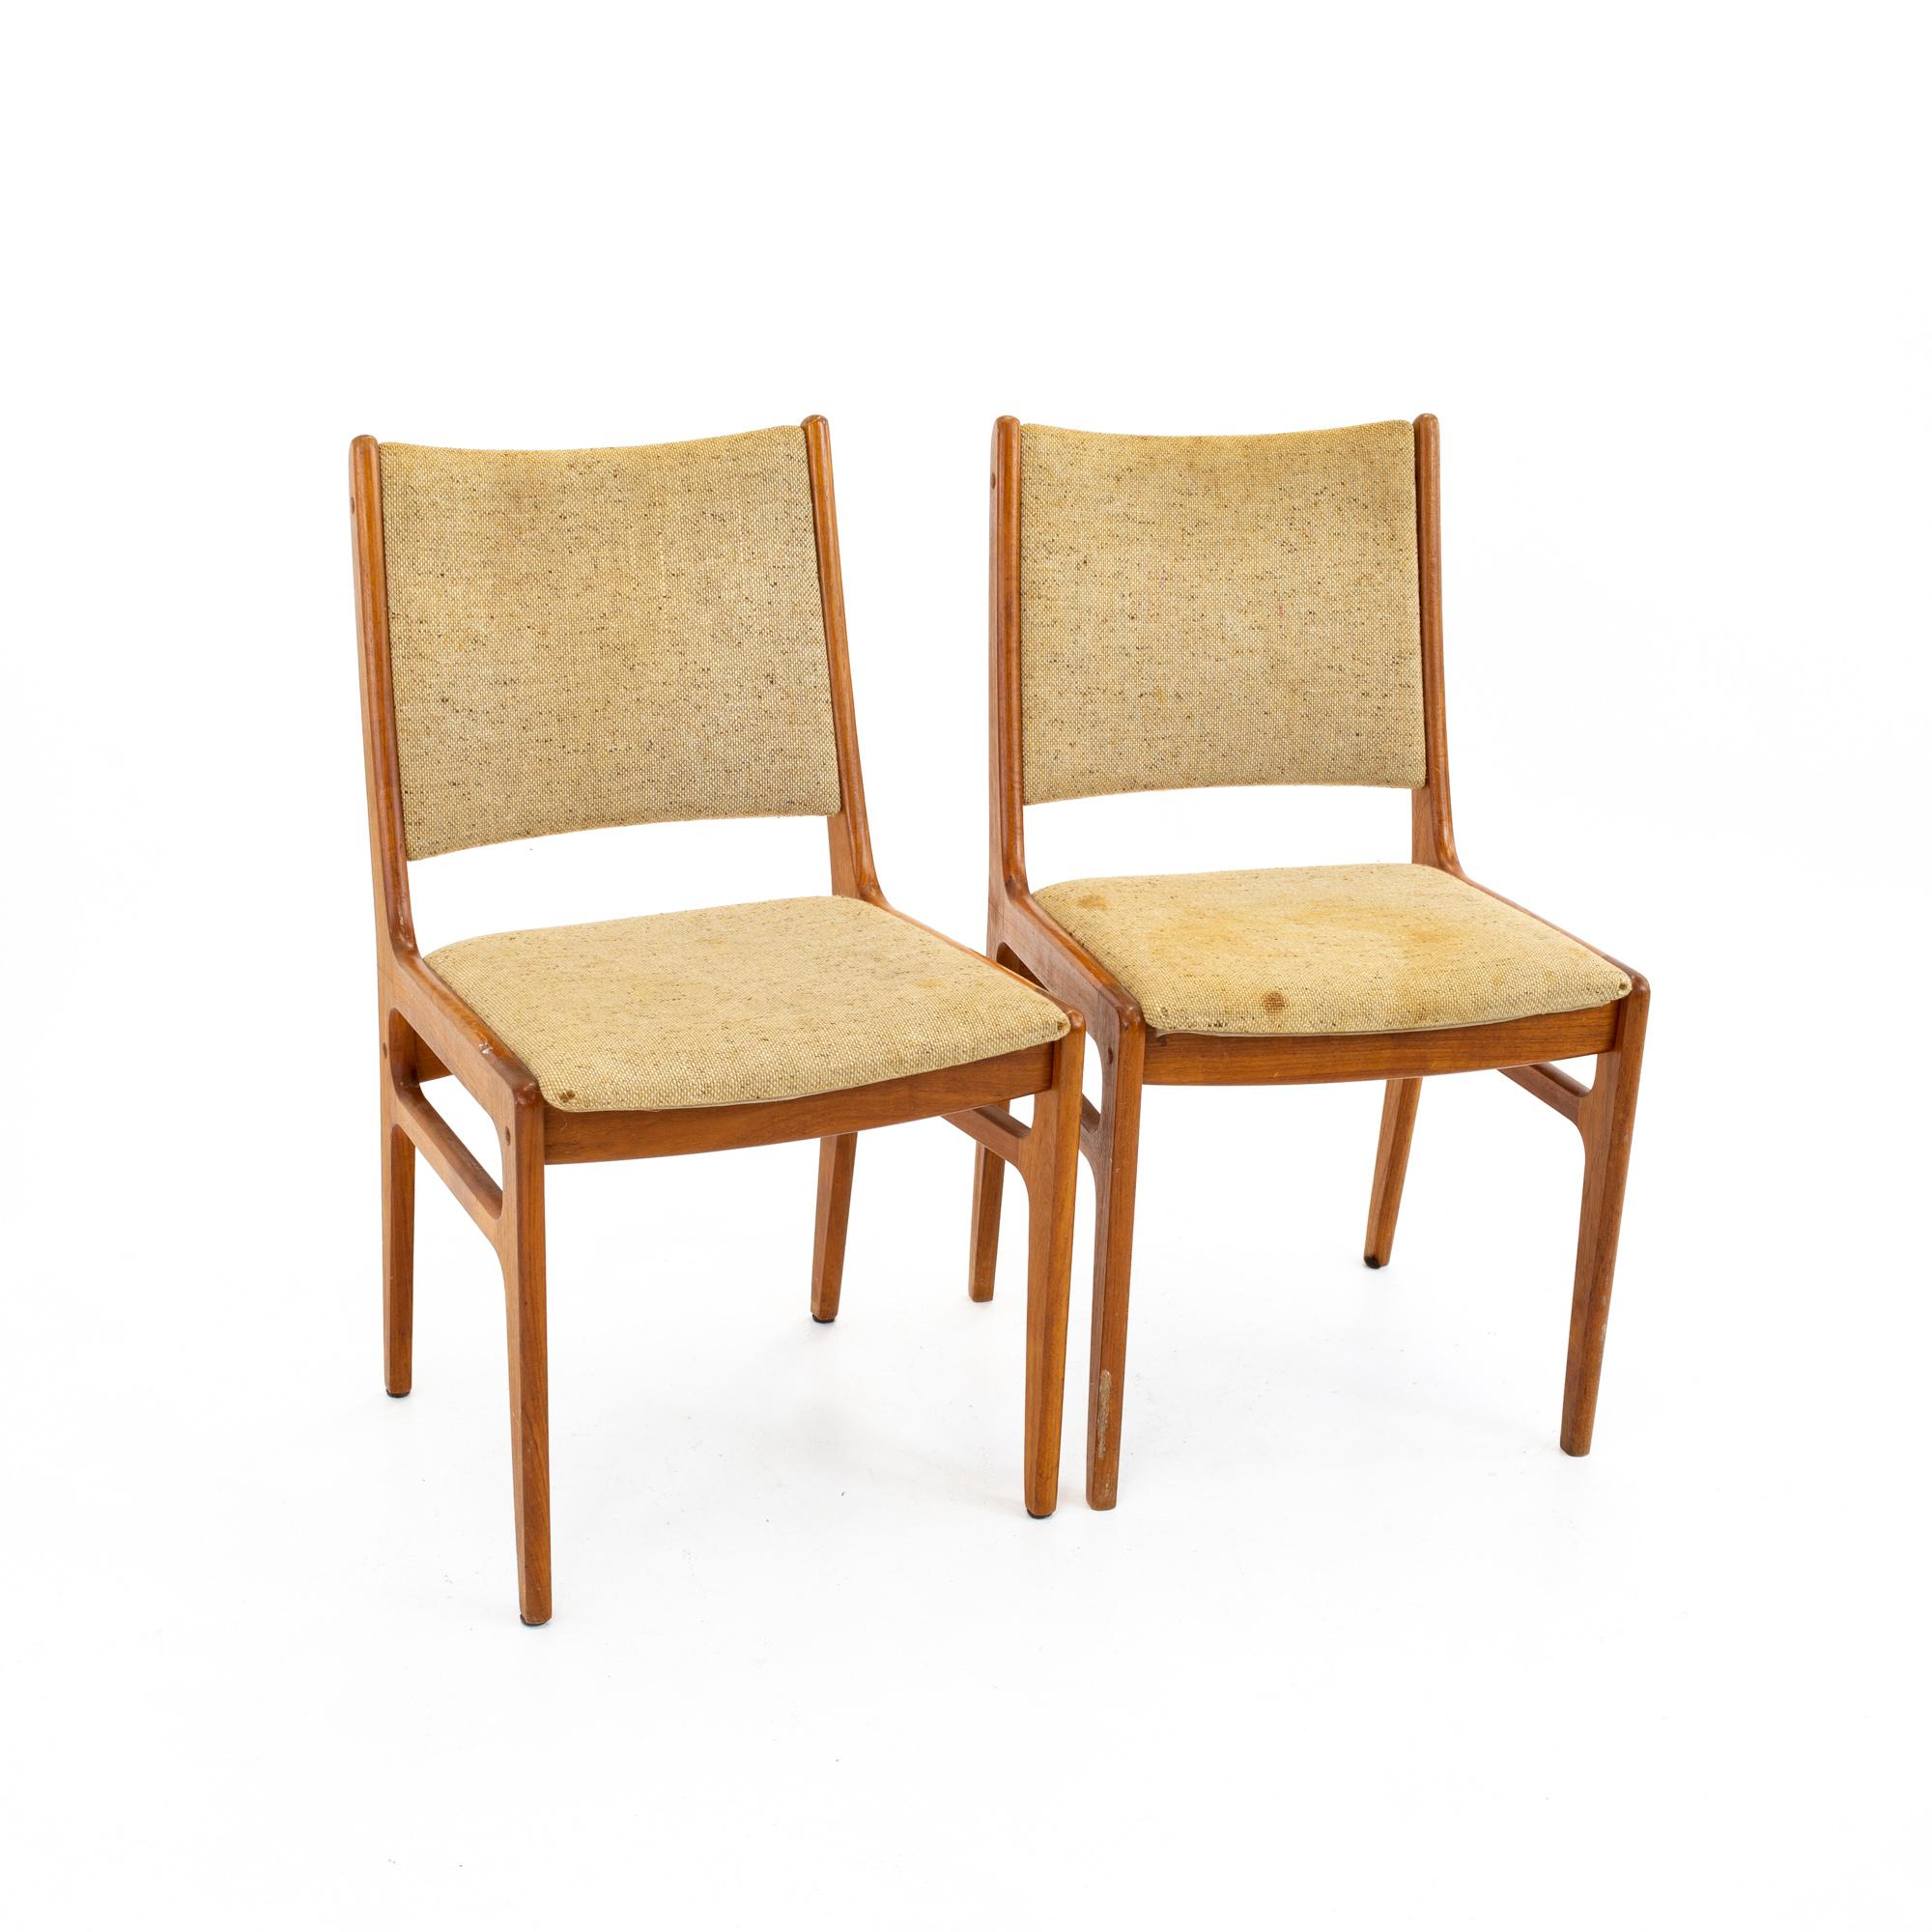 d-scan chairs